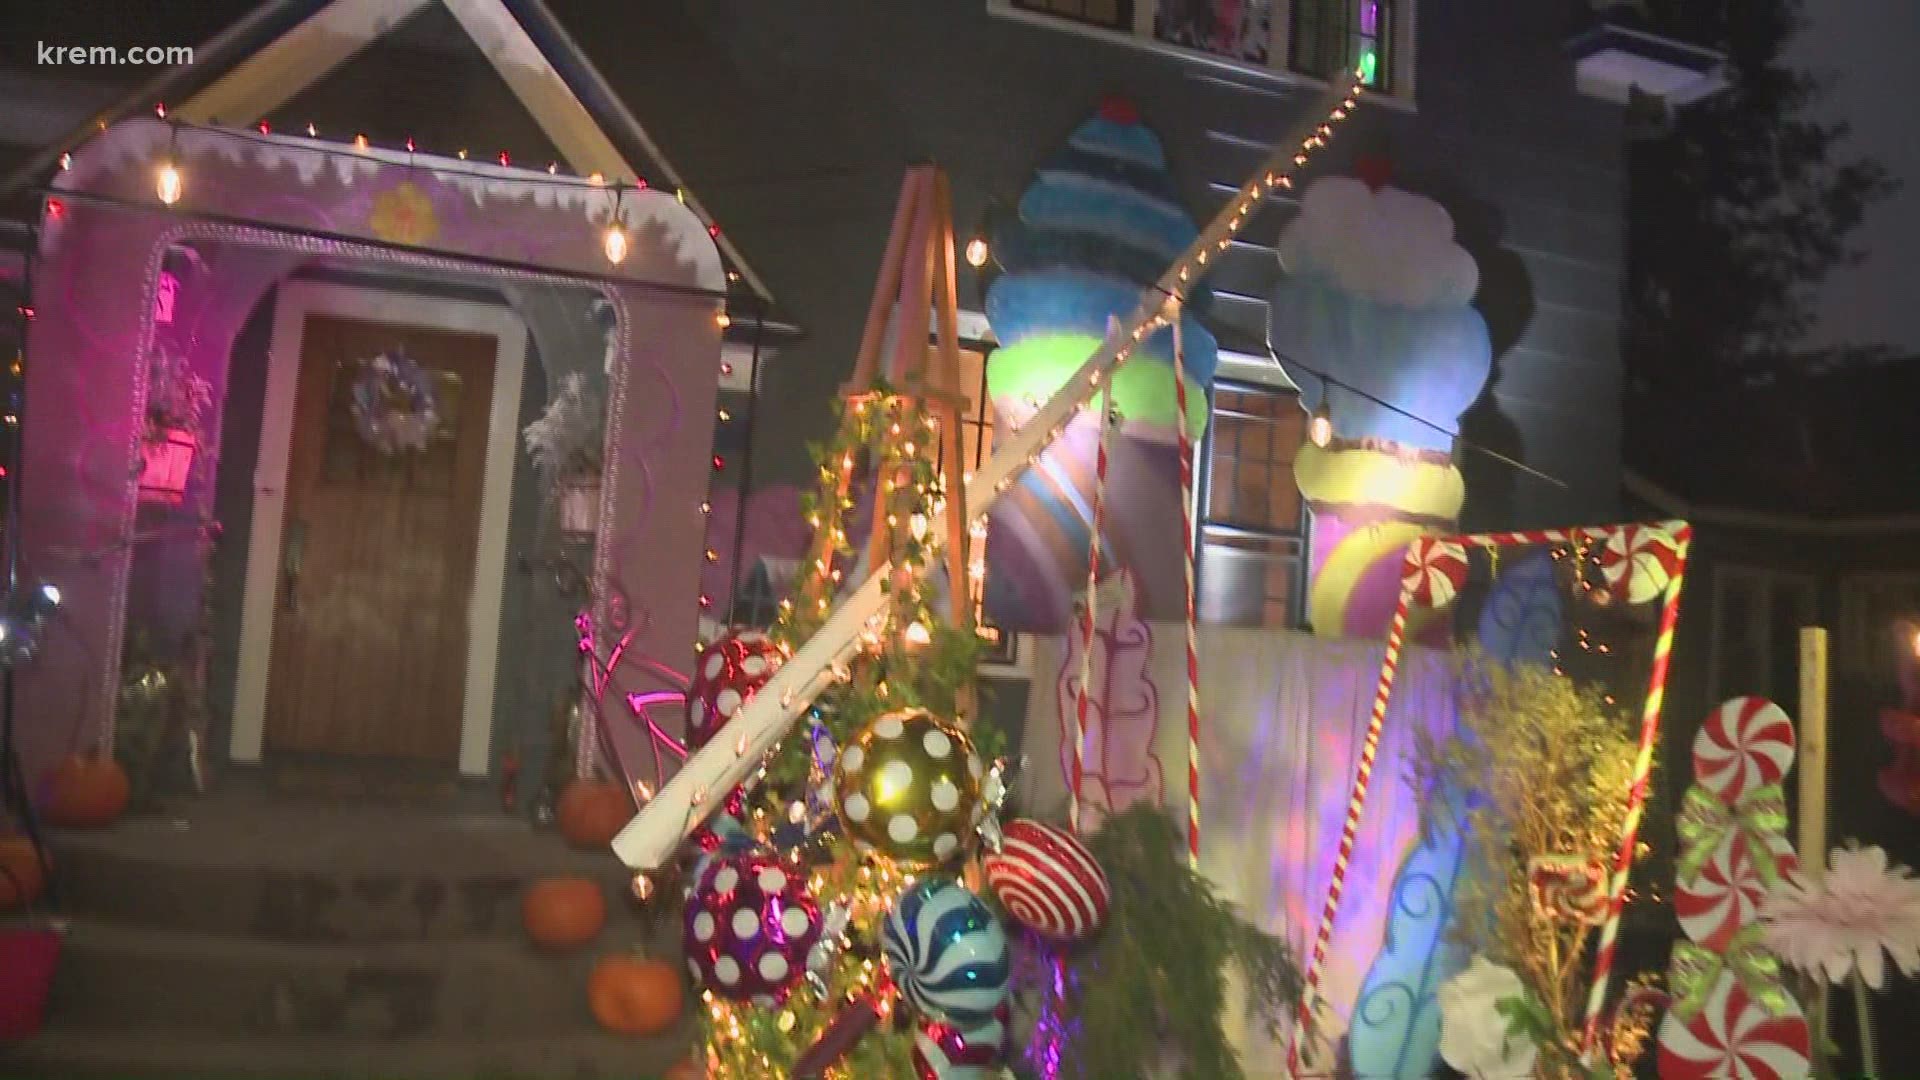 A home on the South Hill has become a trick-or-treating "must-see" over the past few years. This year the theme is Candy Land, complete with a giant candy shoot!